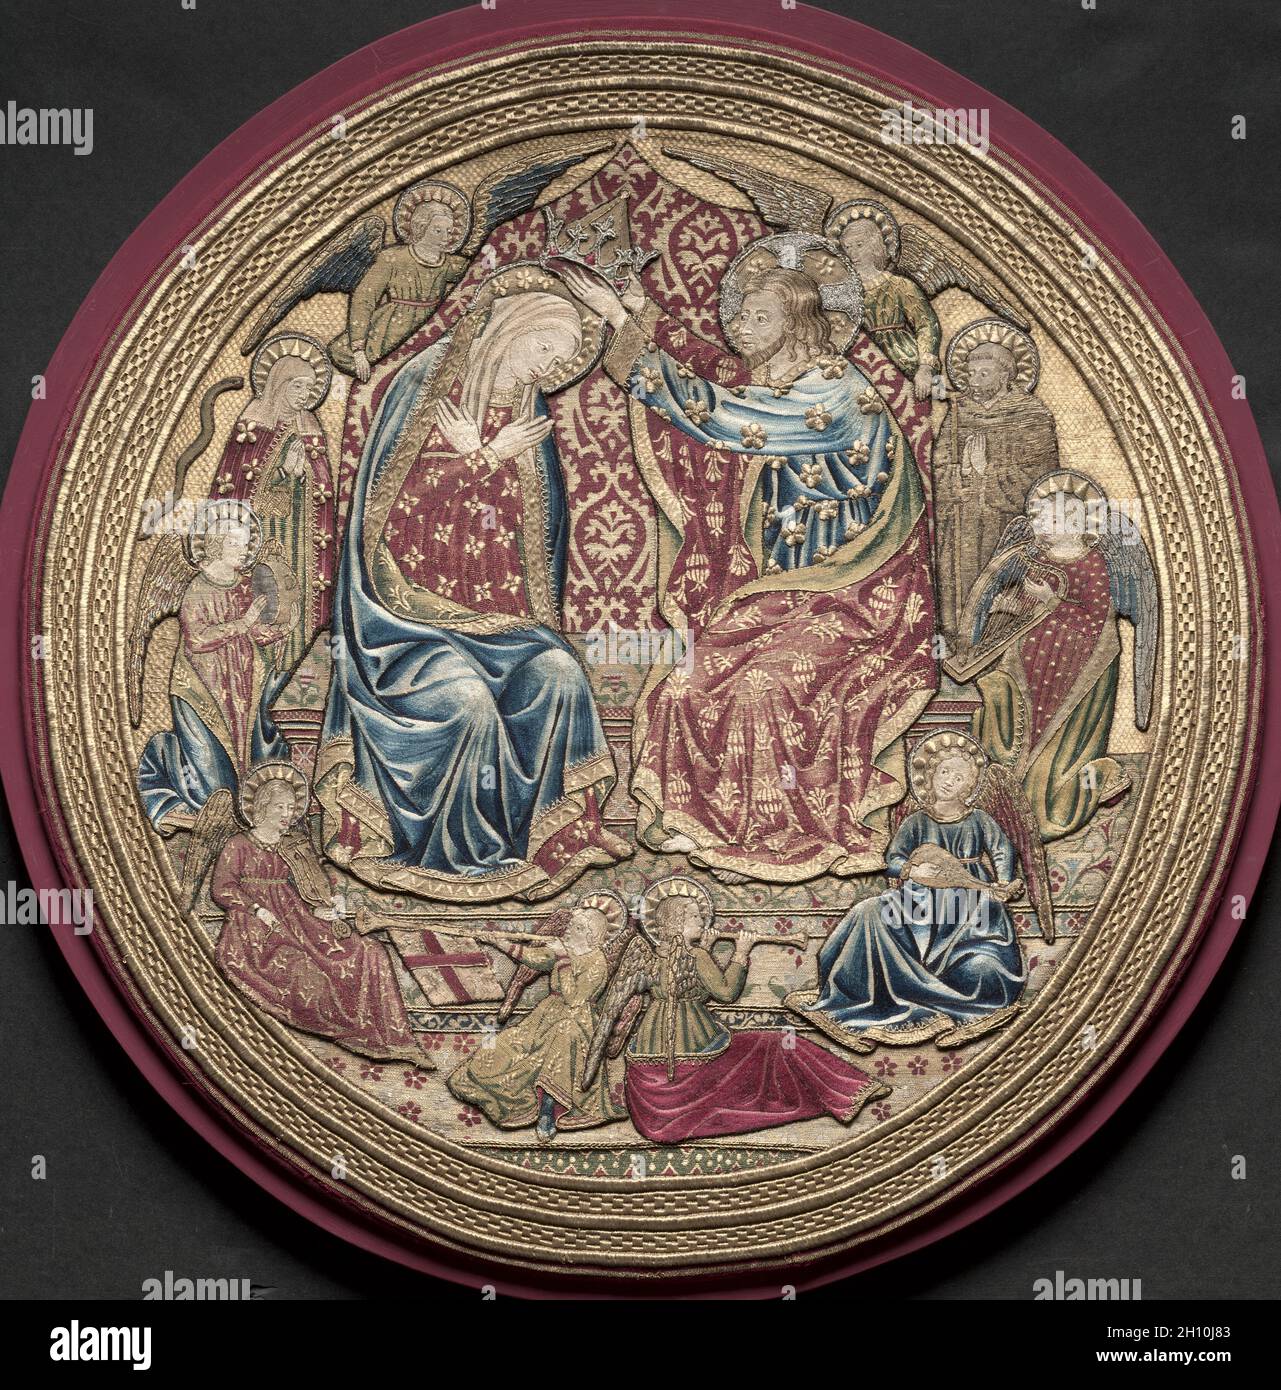 Embroidered Tondo from an Altar Frontal: The Coronation of the Virgin, 1459. Italy, Florence. Embroidery with gold, silver, and silk thread; split, satin, and couching stitches, or nué (shadedgold); overall: 57.8 x 57.8 cm (22 3/4 x 22 3/4 in.). Stock Photo